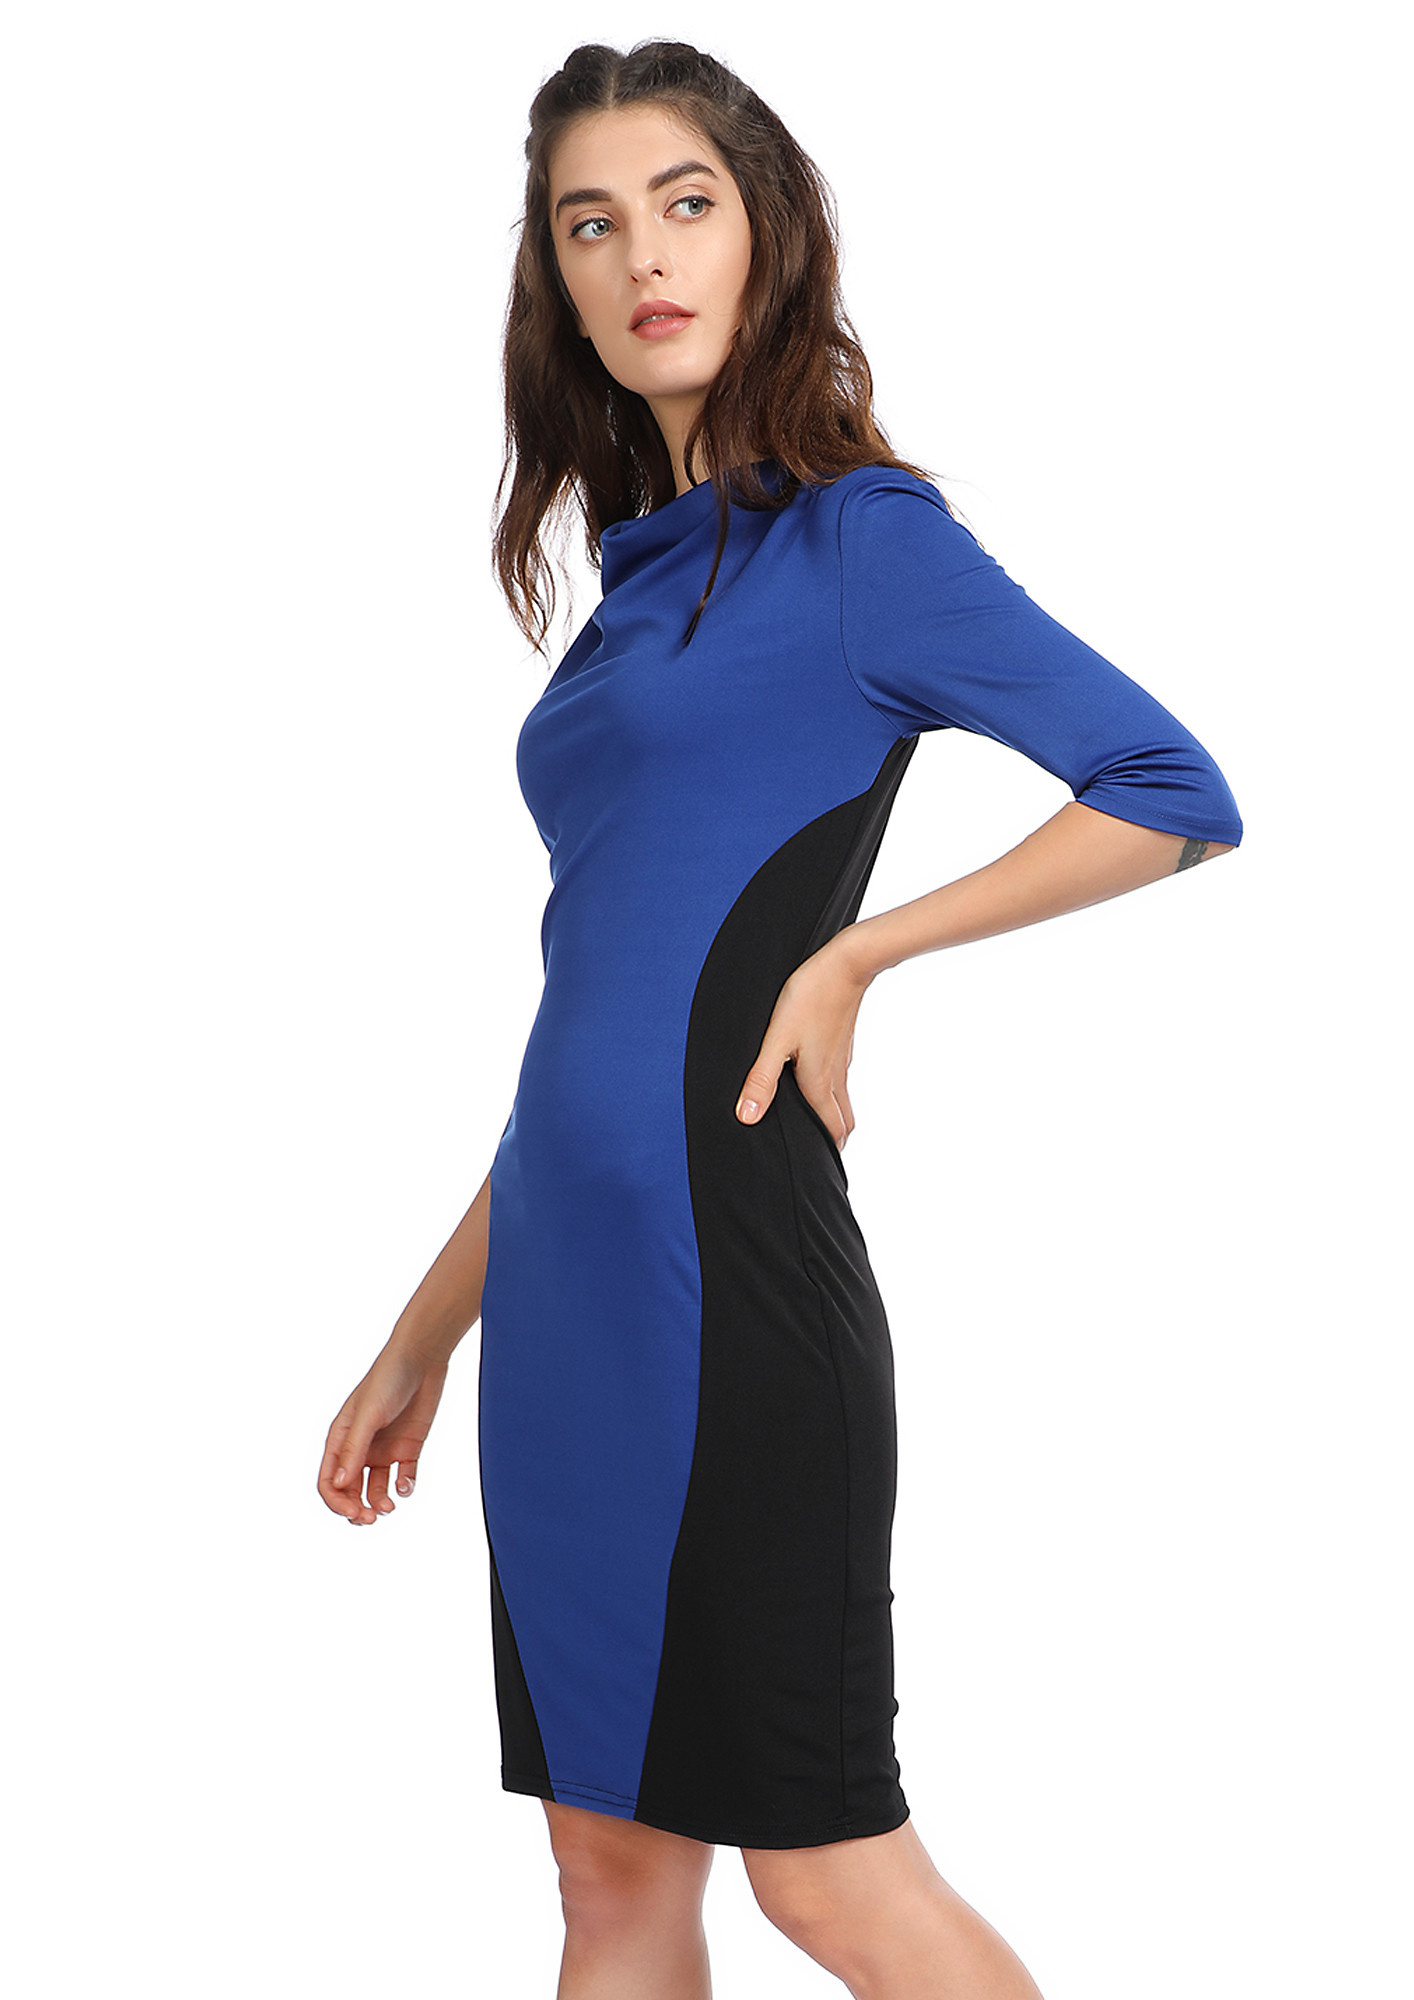 BLOCK ME BY STYLE BLUE BODYCON DRESS